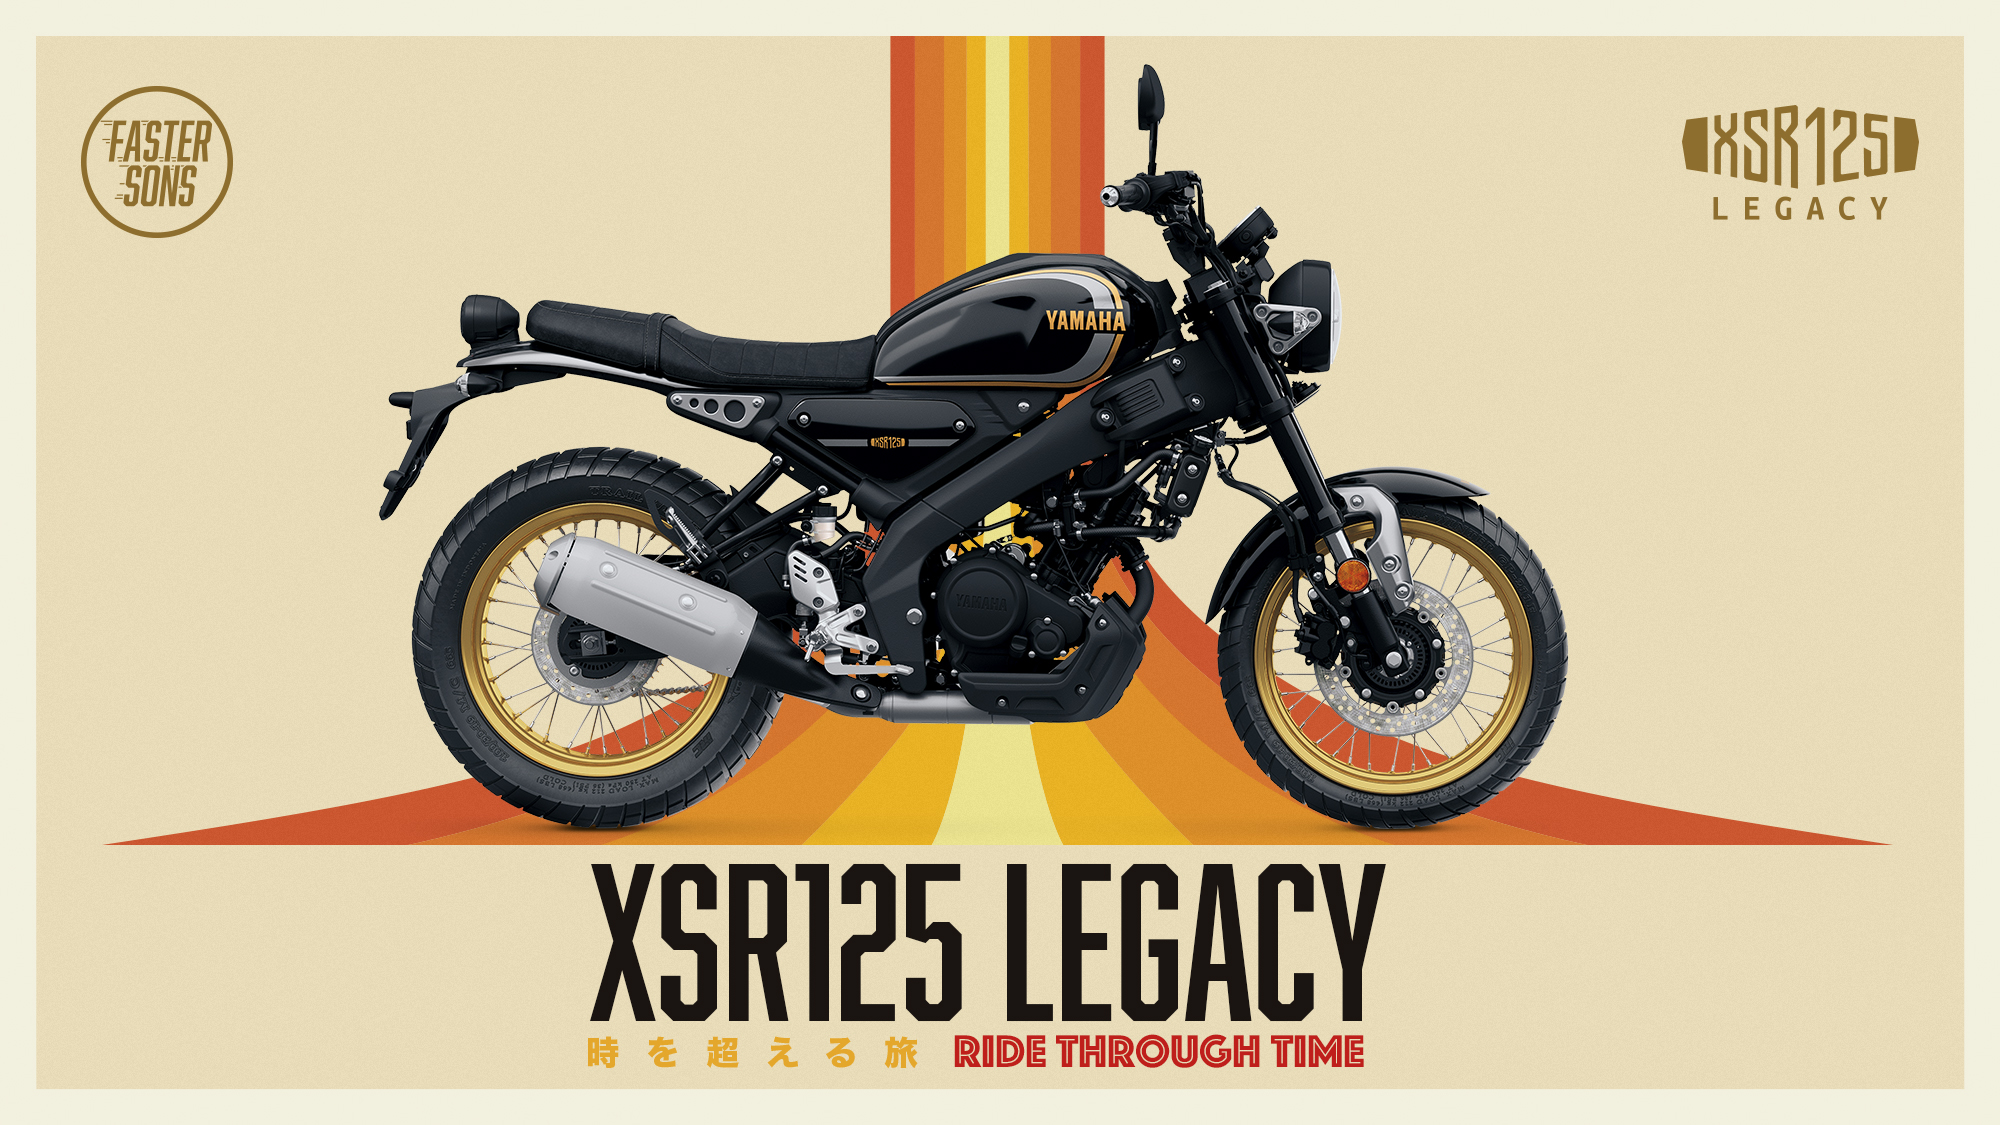 Yamaha Motor Europe and Armando Testa launch the new XSR125 Legacy: a ride through time and style.